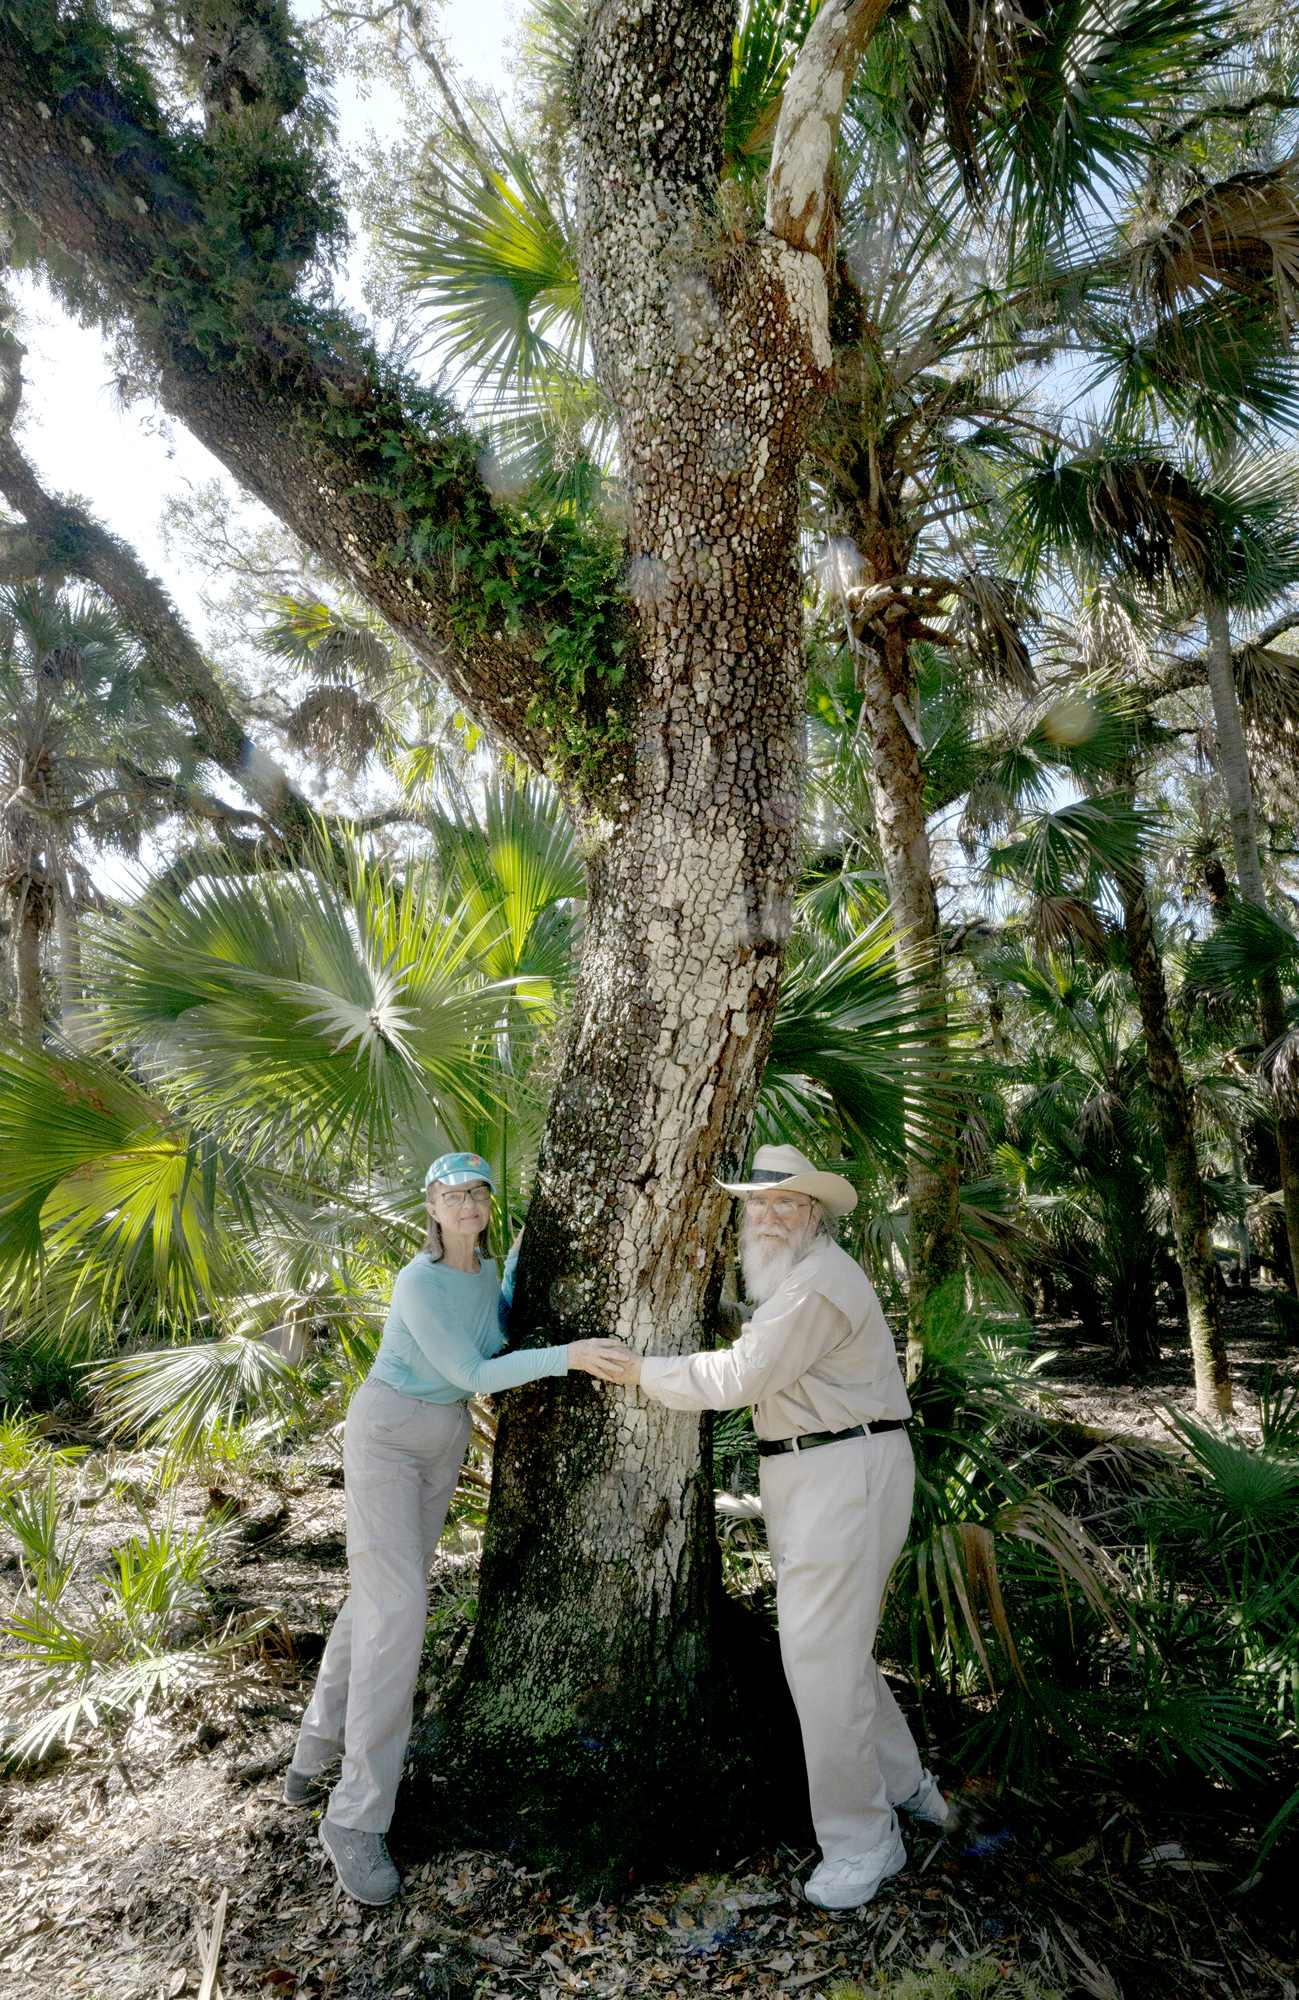 Niki and Clyde Butcher live up to the term “tree huggers.” Photo by Jackie Obendorf